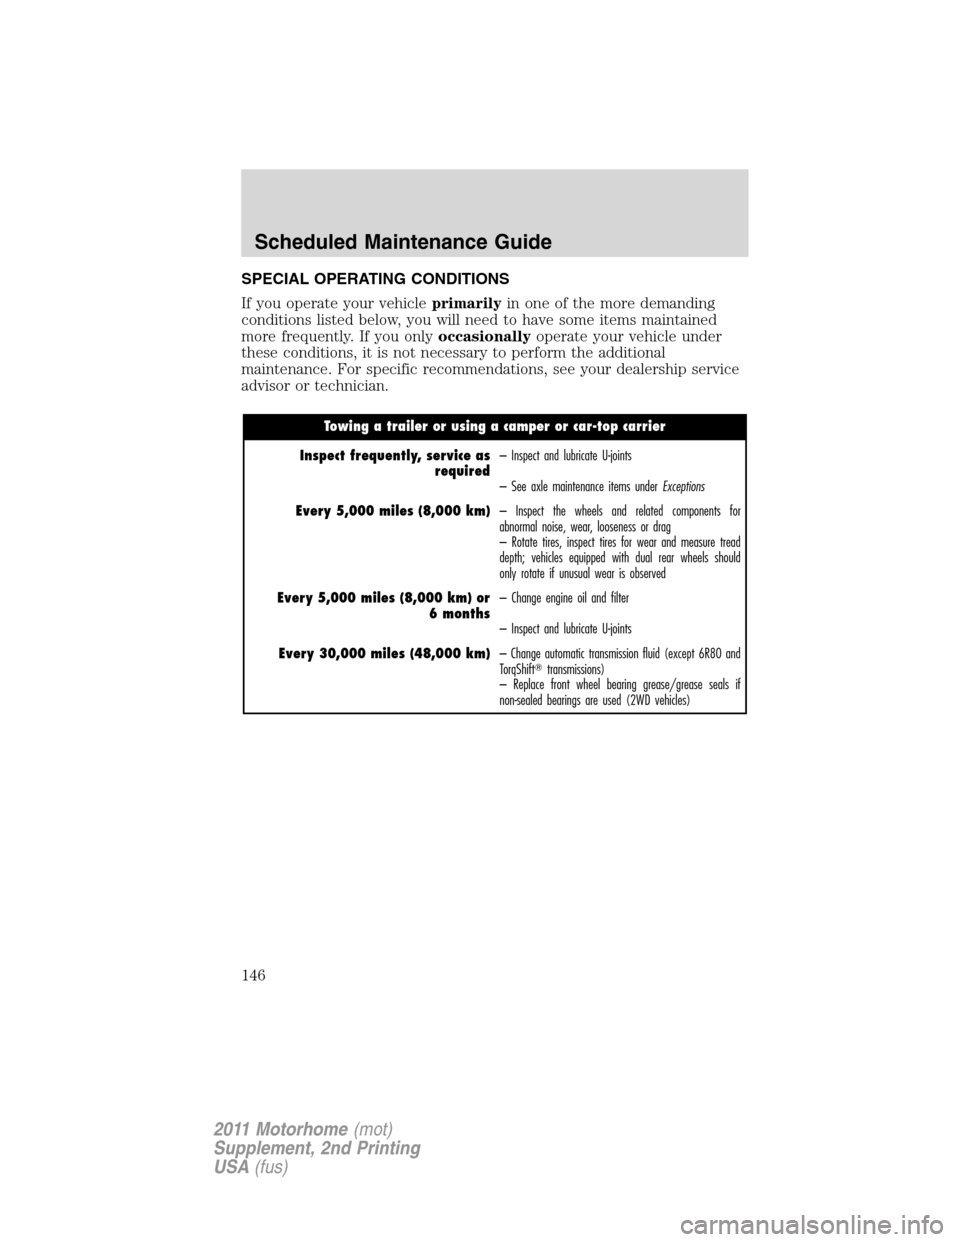 FORD F SERIES MOTORHOME AND COMMERCIAL CHASSIS 2011 12.G User Guide SPECIAL OPERATING CONDITIONS
If you operate your vehicleprimarilyin one of the more demanding
conditions listed below, you will need to have some items maintained
more frequently. If you onlyoccasiona